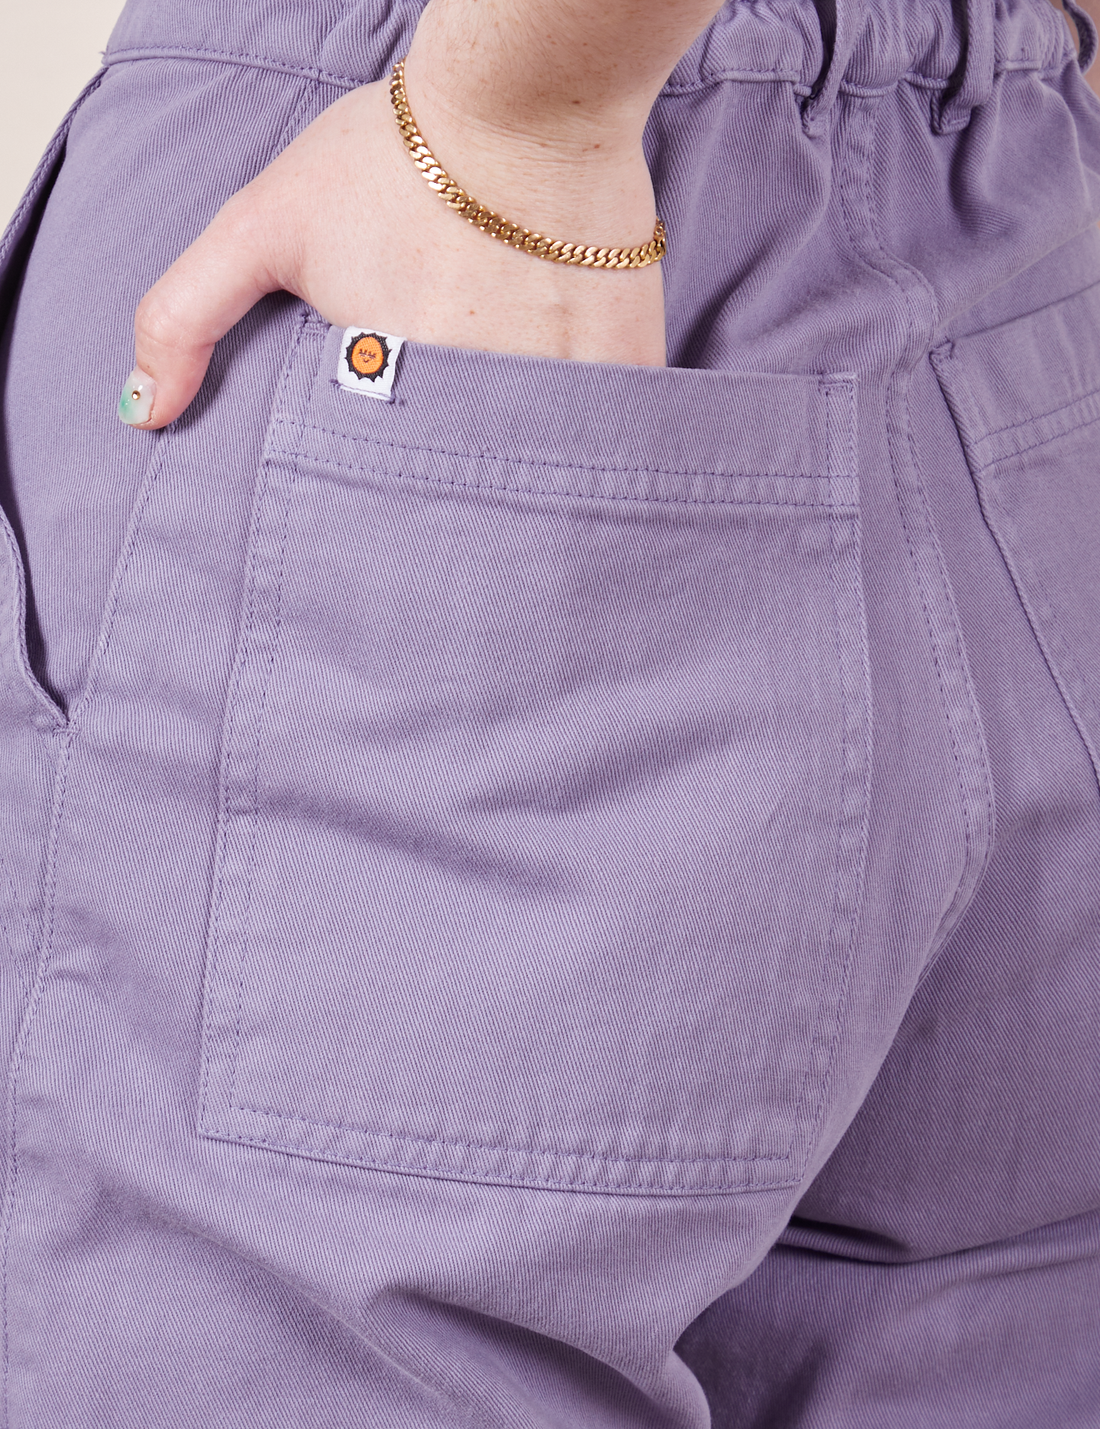 Back pocket close up of Petite Short Sleeve Jumpsuit in Faded Grape. Hana has their hand in the pocket.